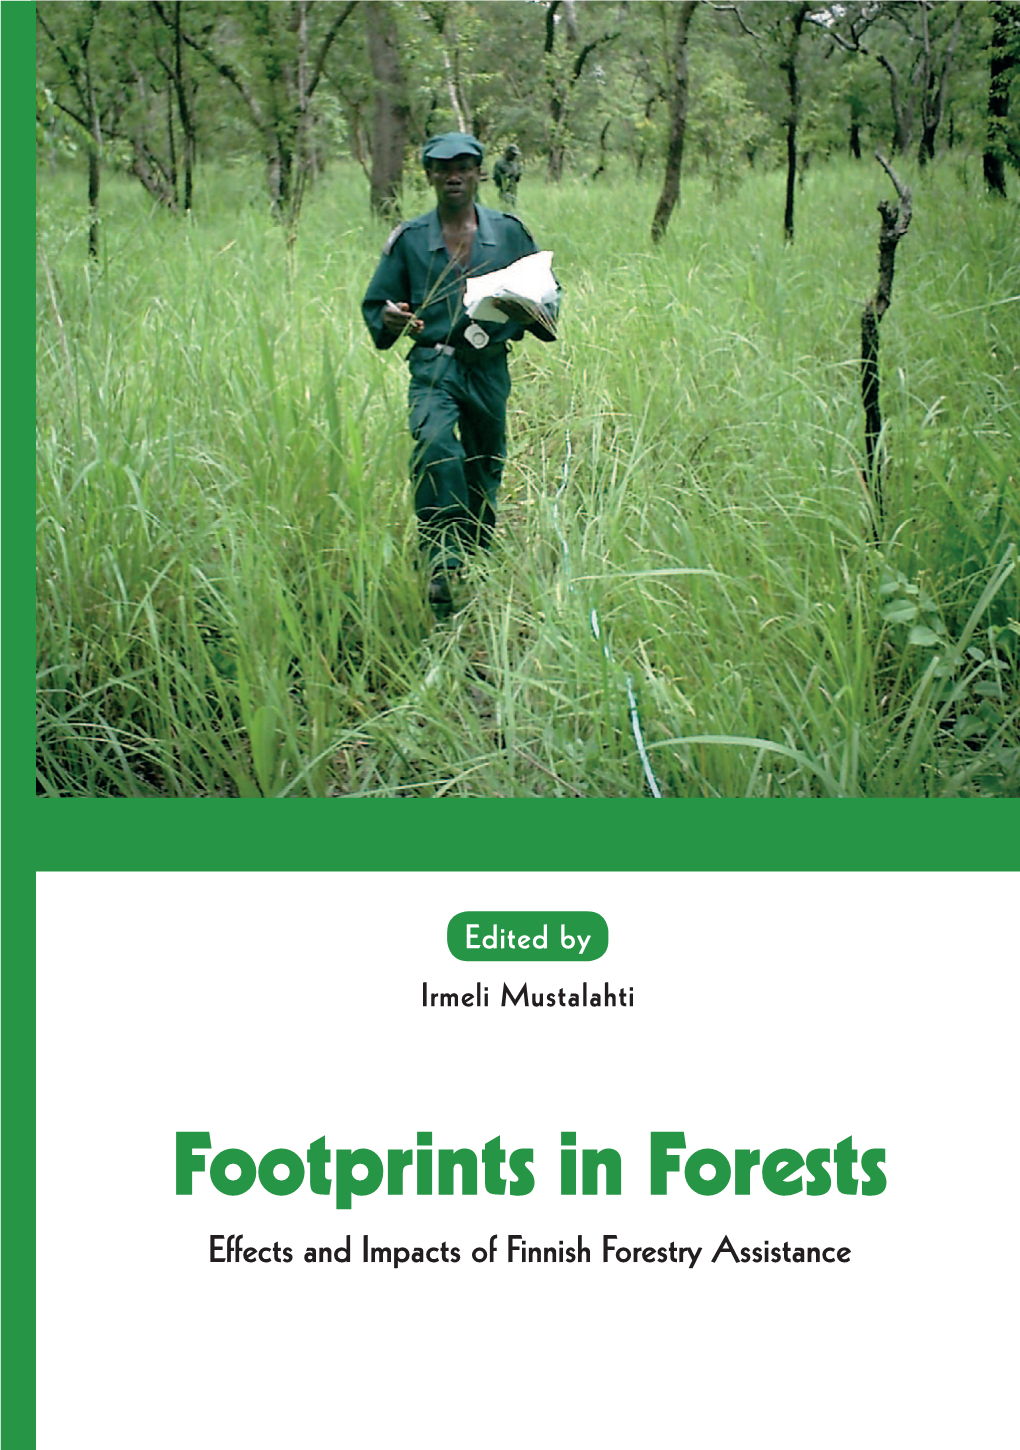 Footprints in Forests